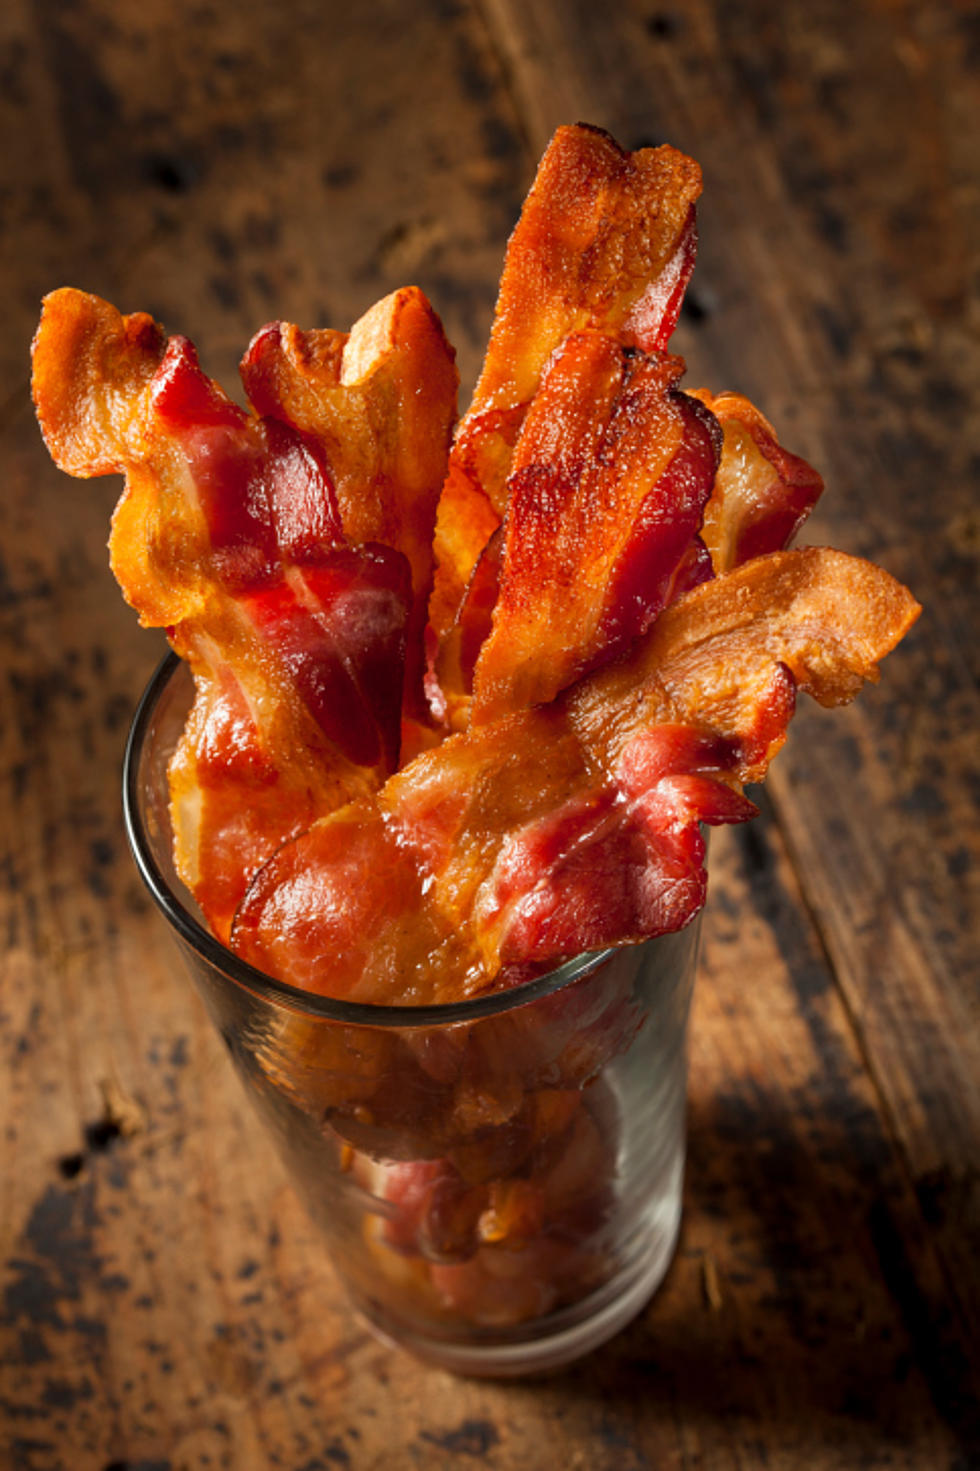 Bacon Inspired Dishes for Your Next Party